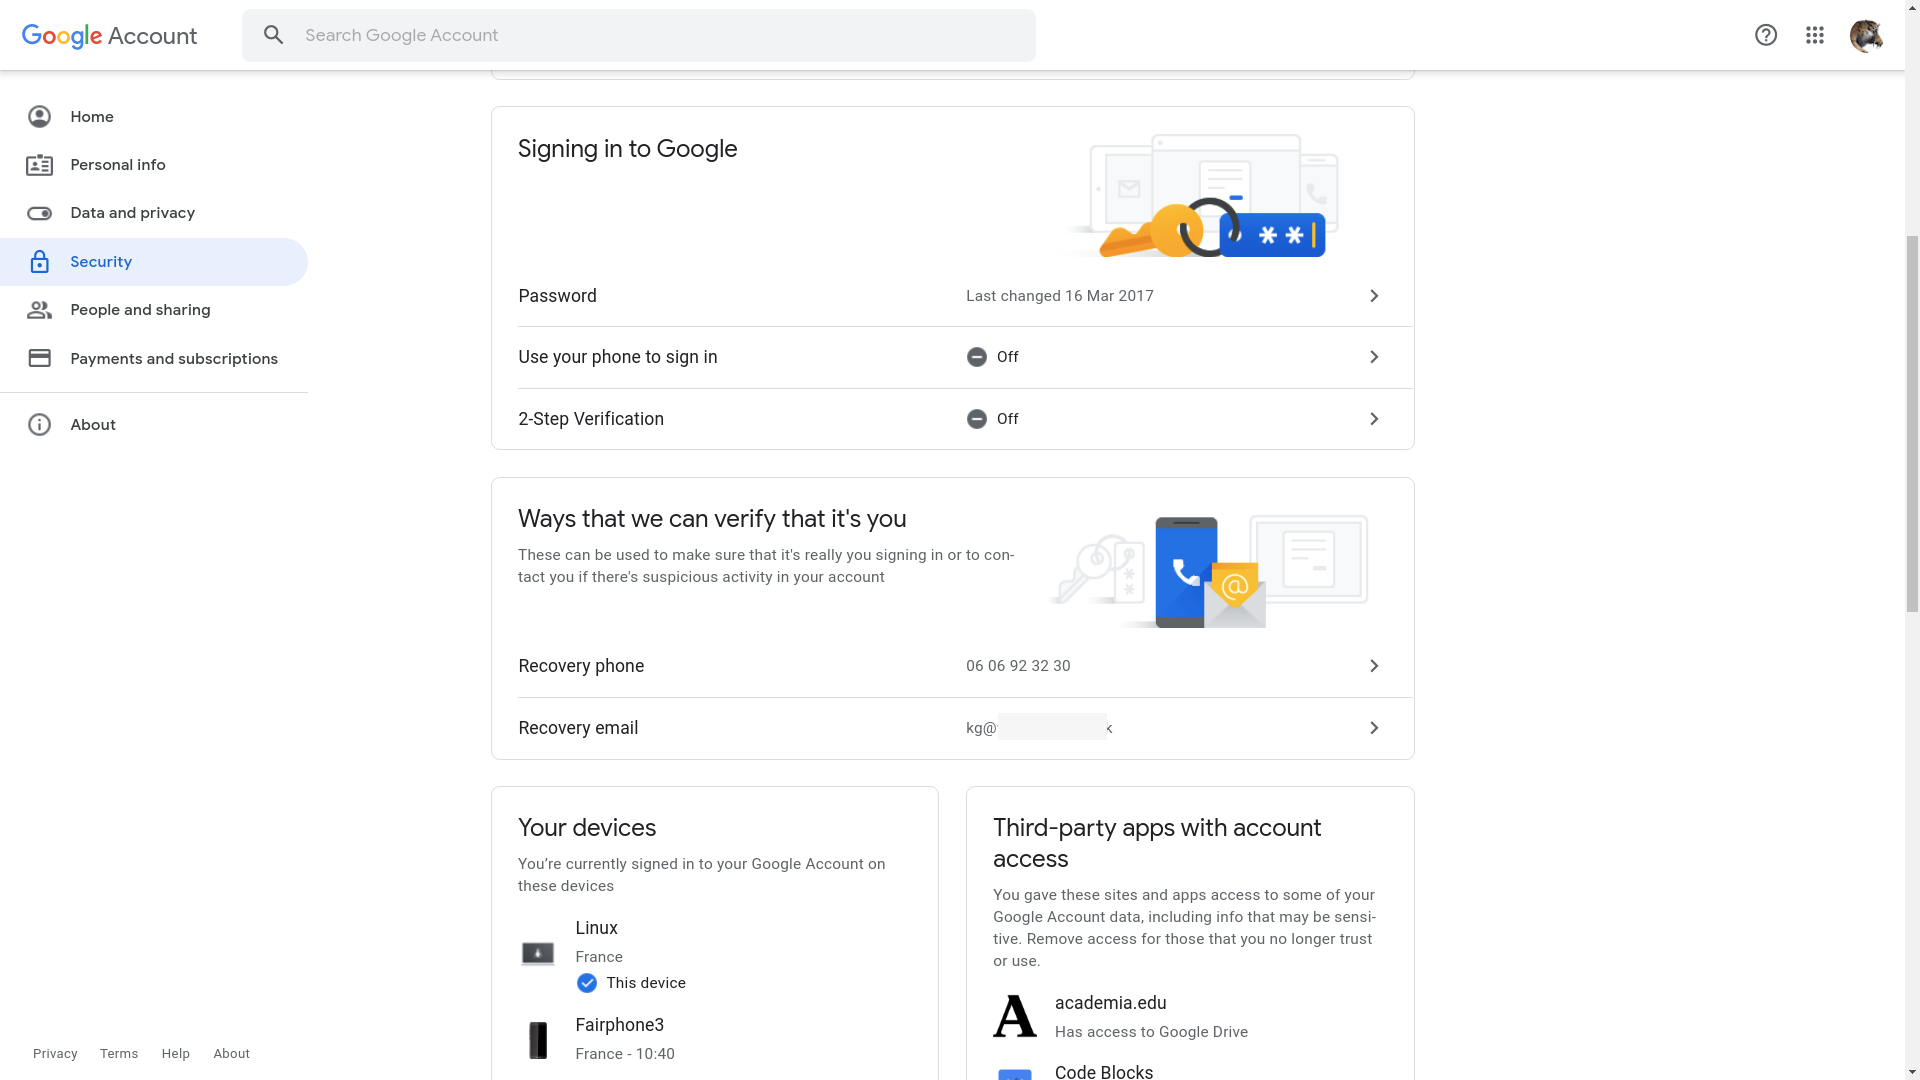 Google account security page